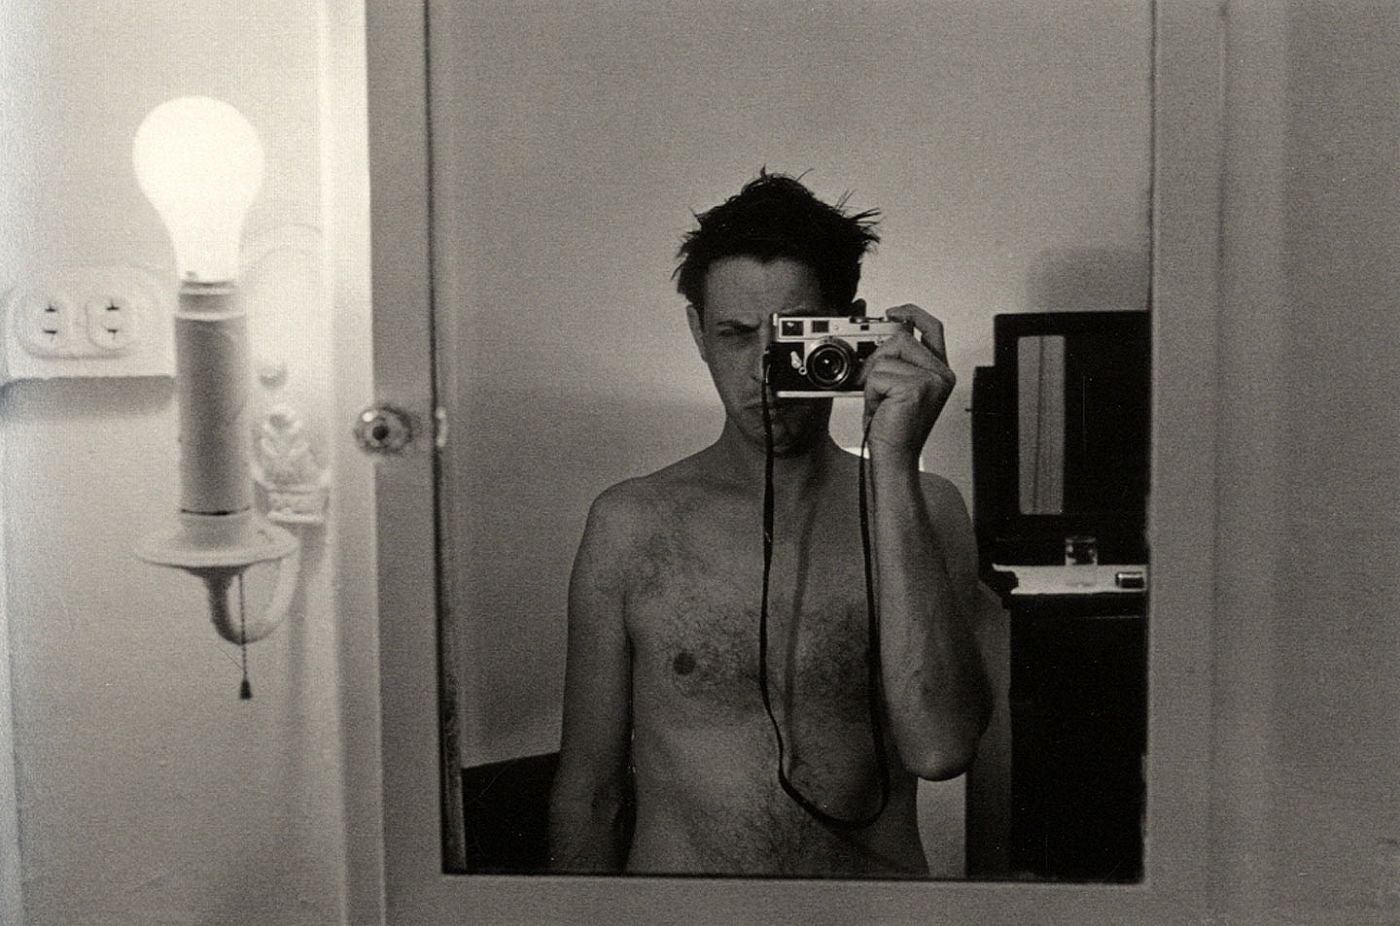 Self Portrait: Photographs by Lee Friedlander (Third Revised Hardcover Edition, MoMA, New York) [SIGNED]